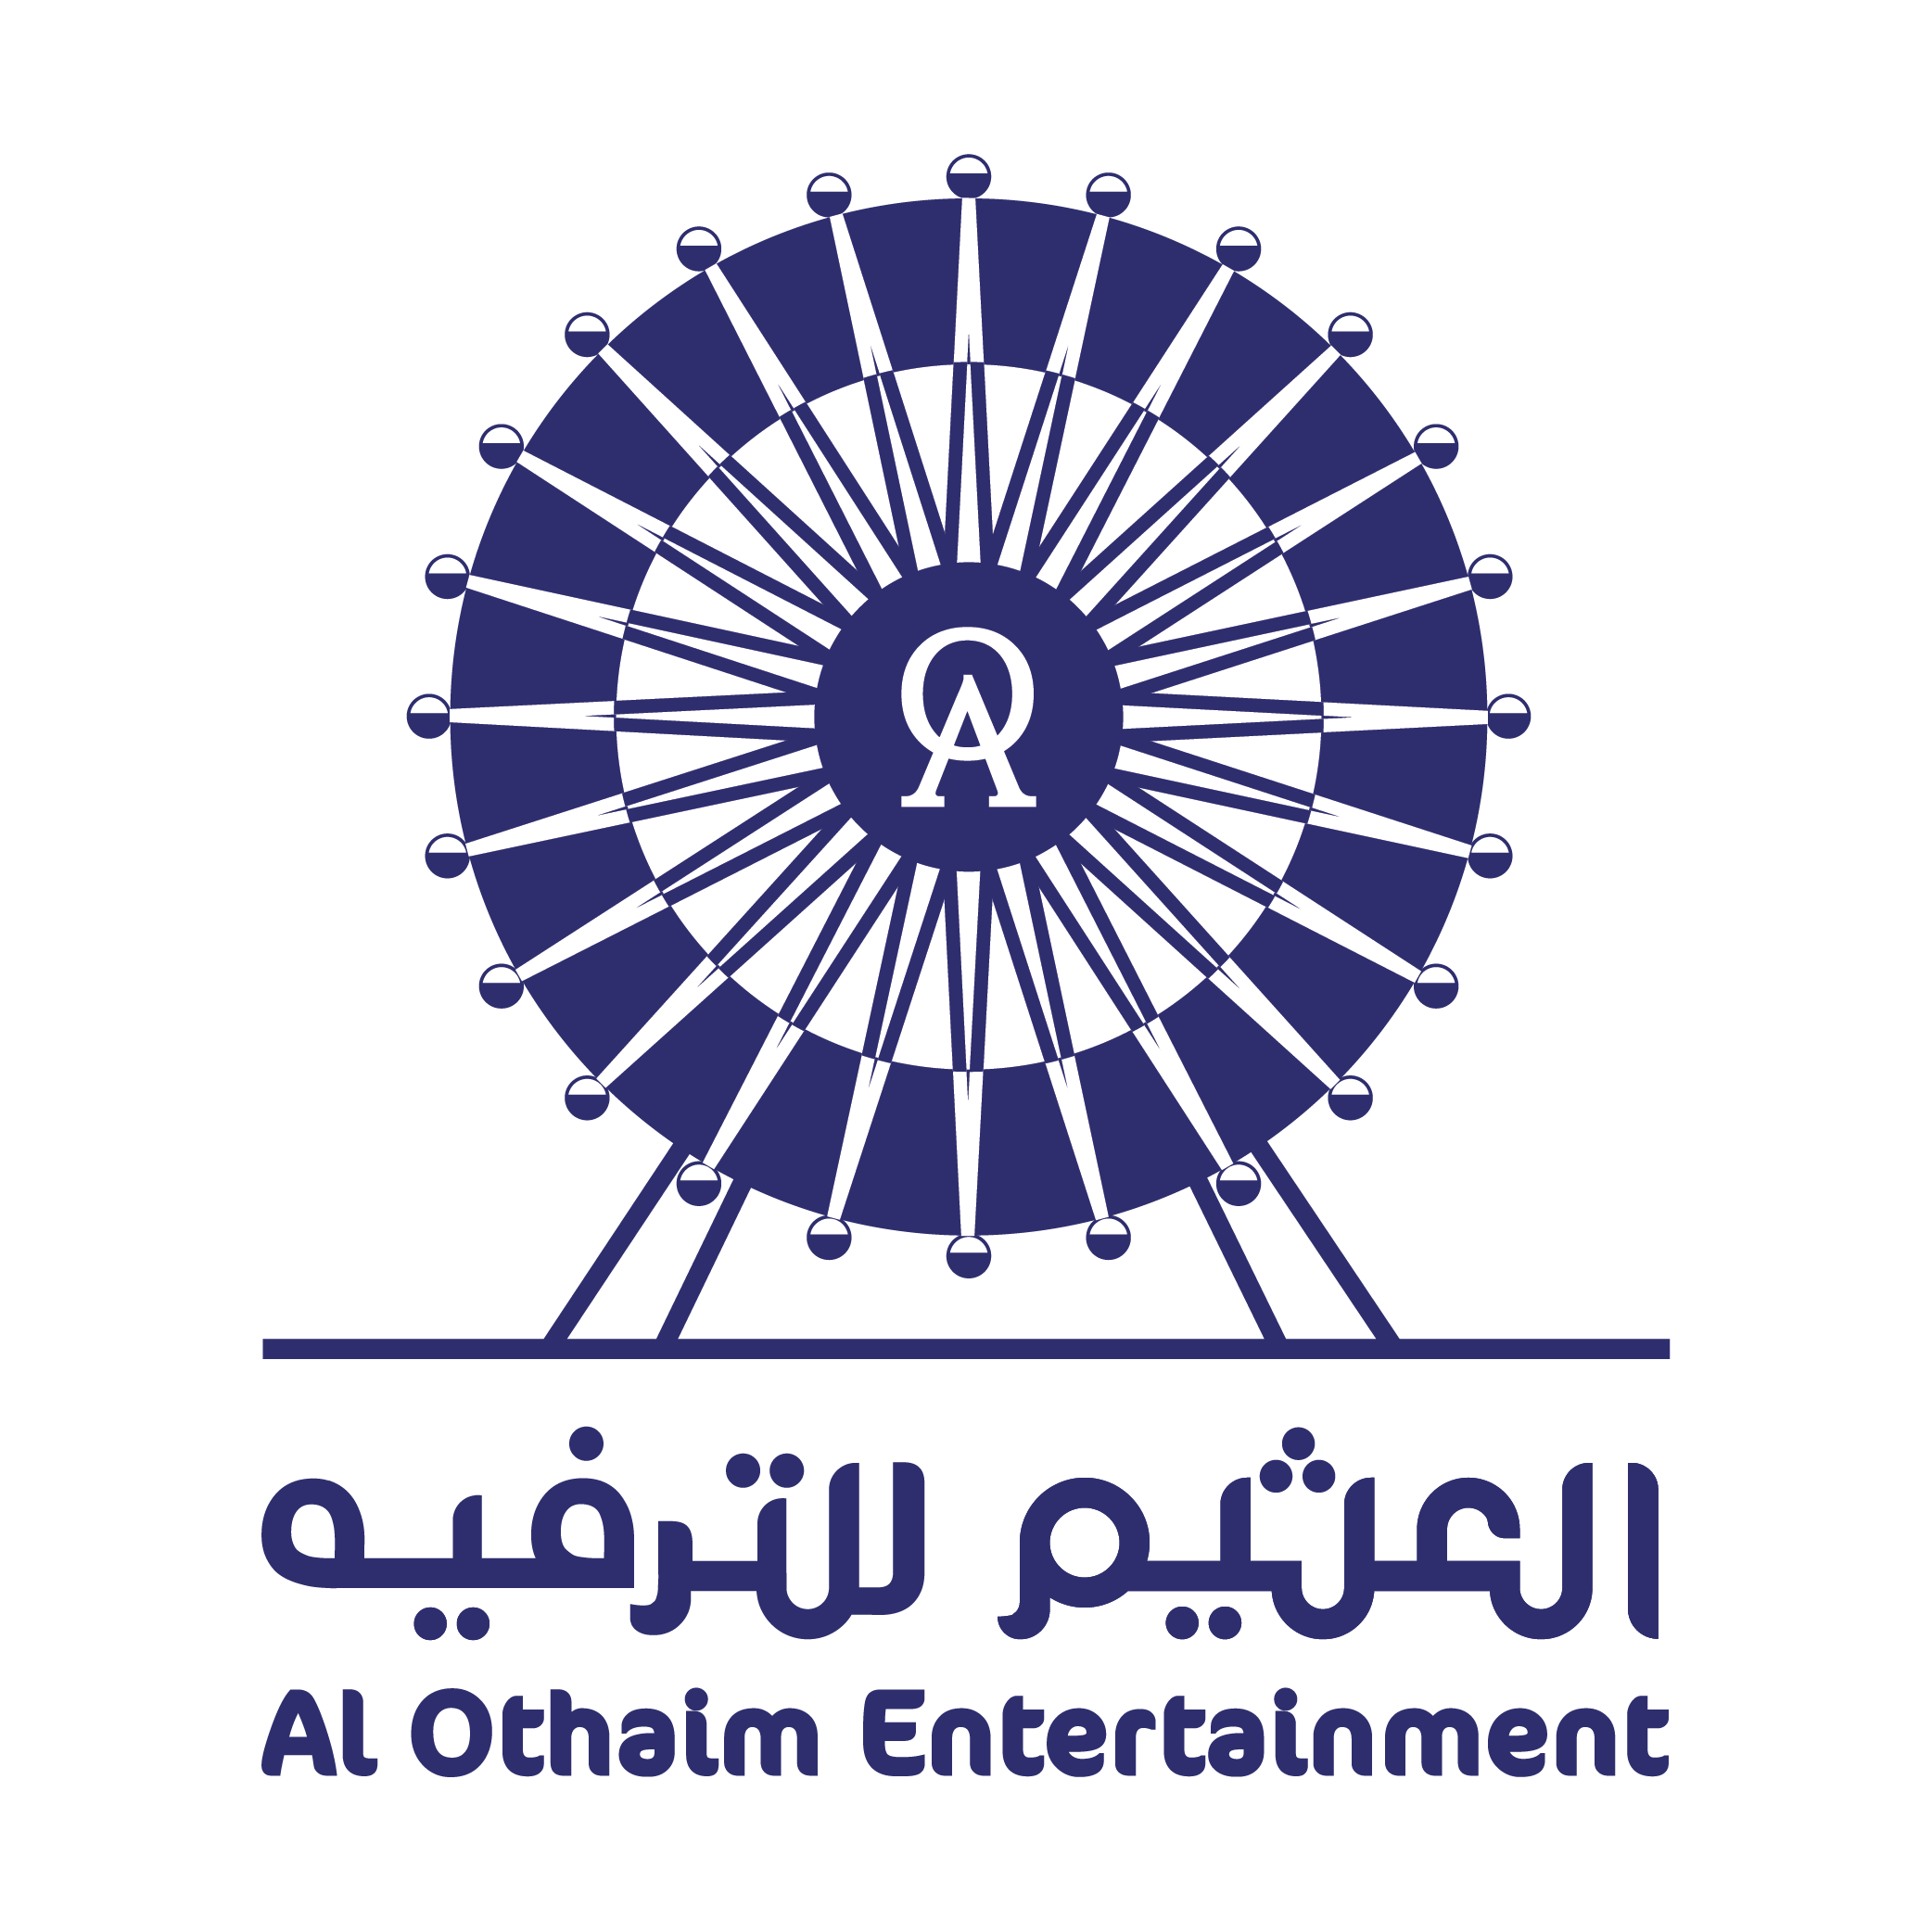 Alhokair group was started in 1975 to invest in the entertainment and hospitality sectors. 